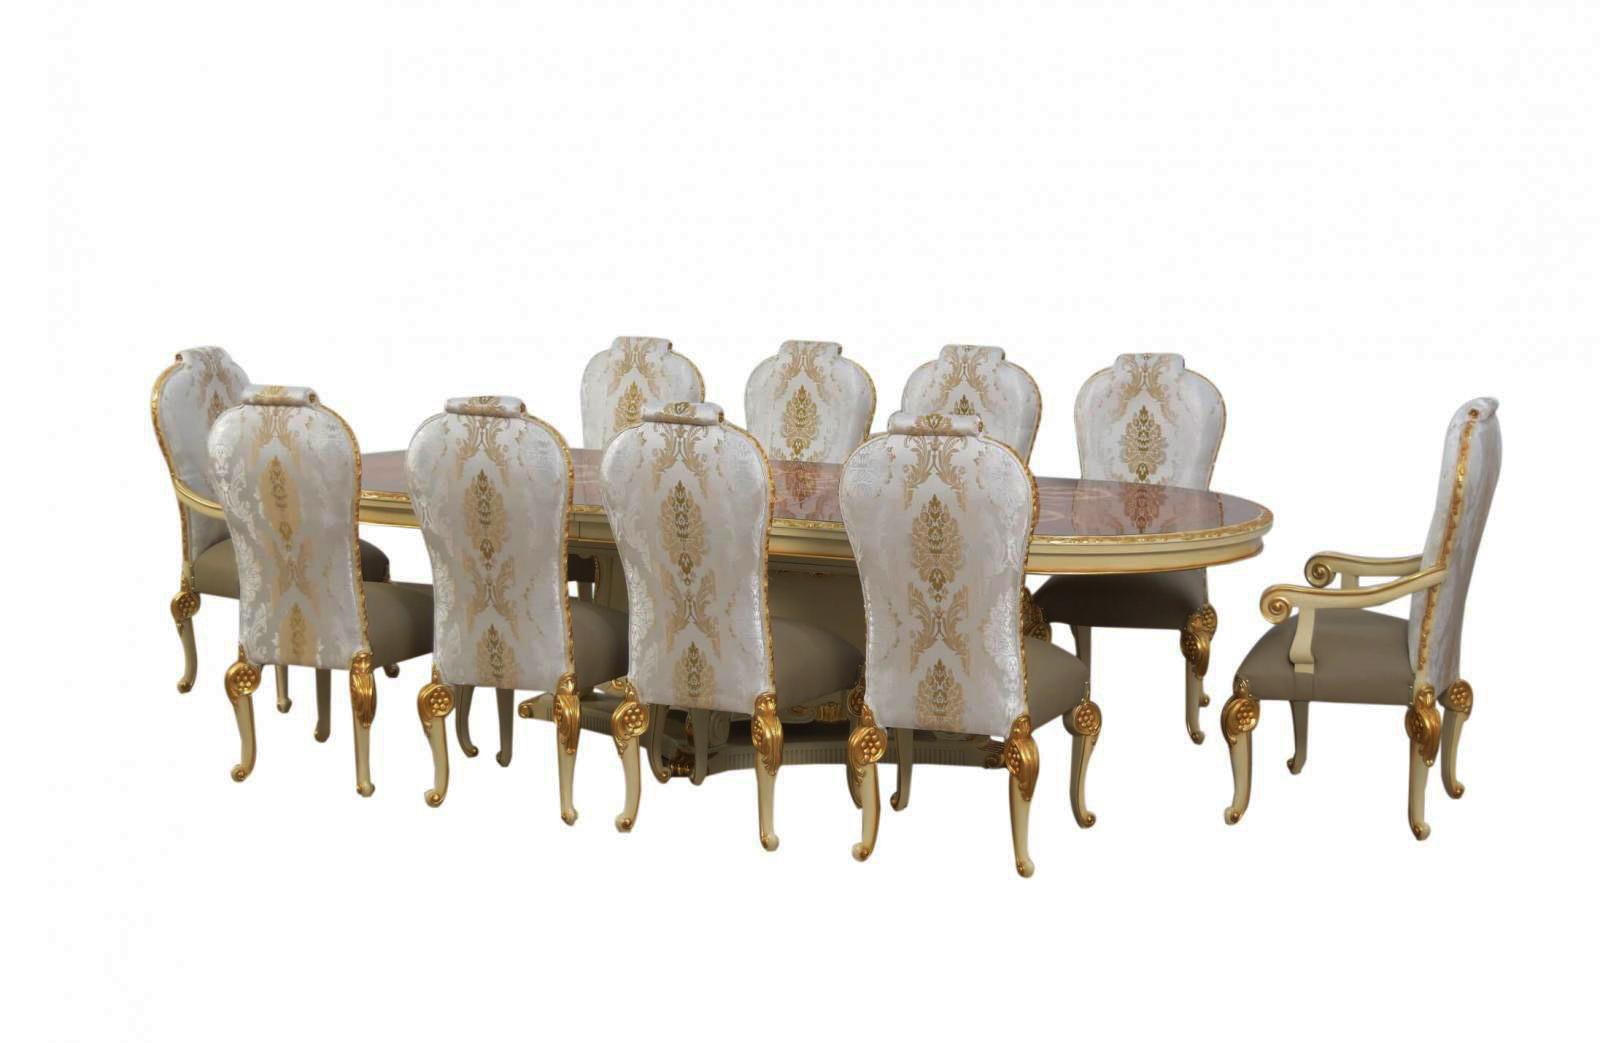 Contemporary, Modern Dining Table Set BELLAGIO 40059-D-Set-11 in Pearl, Gold, Beige Leather